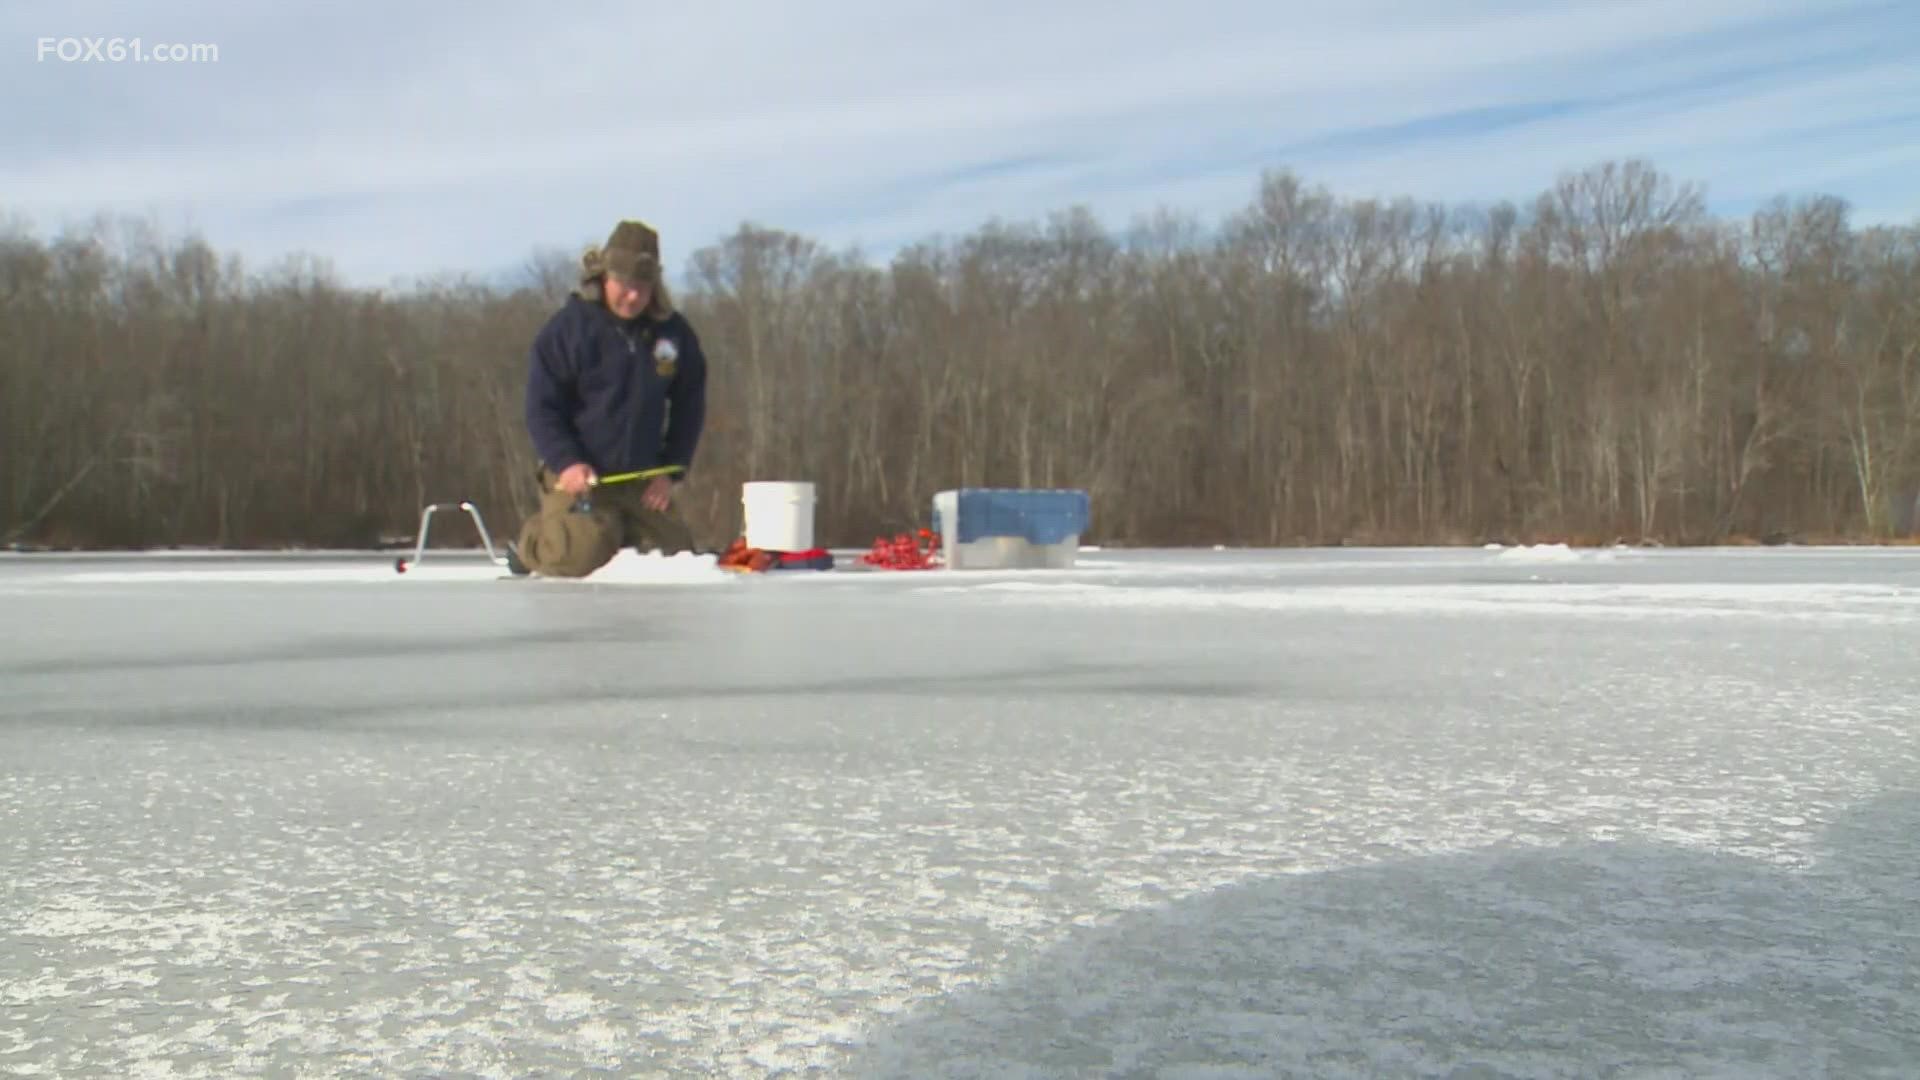 The deep freeze isn’t for everyone, but it's making this winter a winner for ice fishing. CT DEEP explains how to safely get involved in the sport.